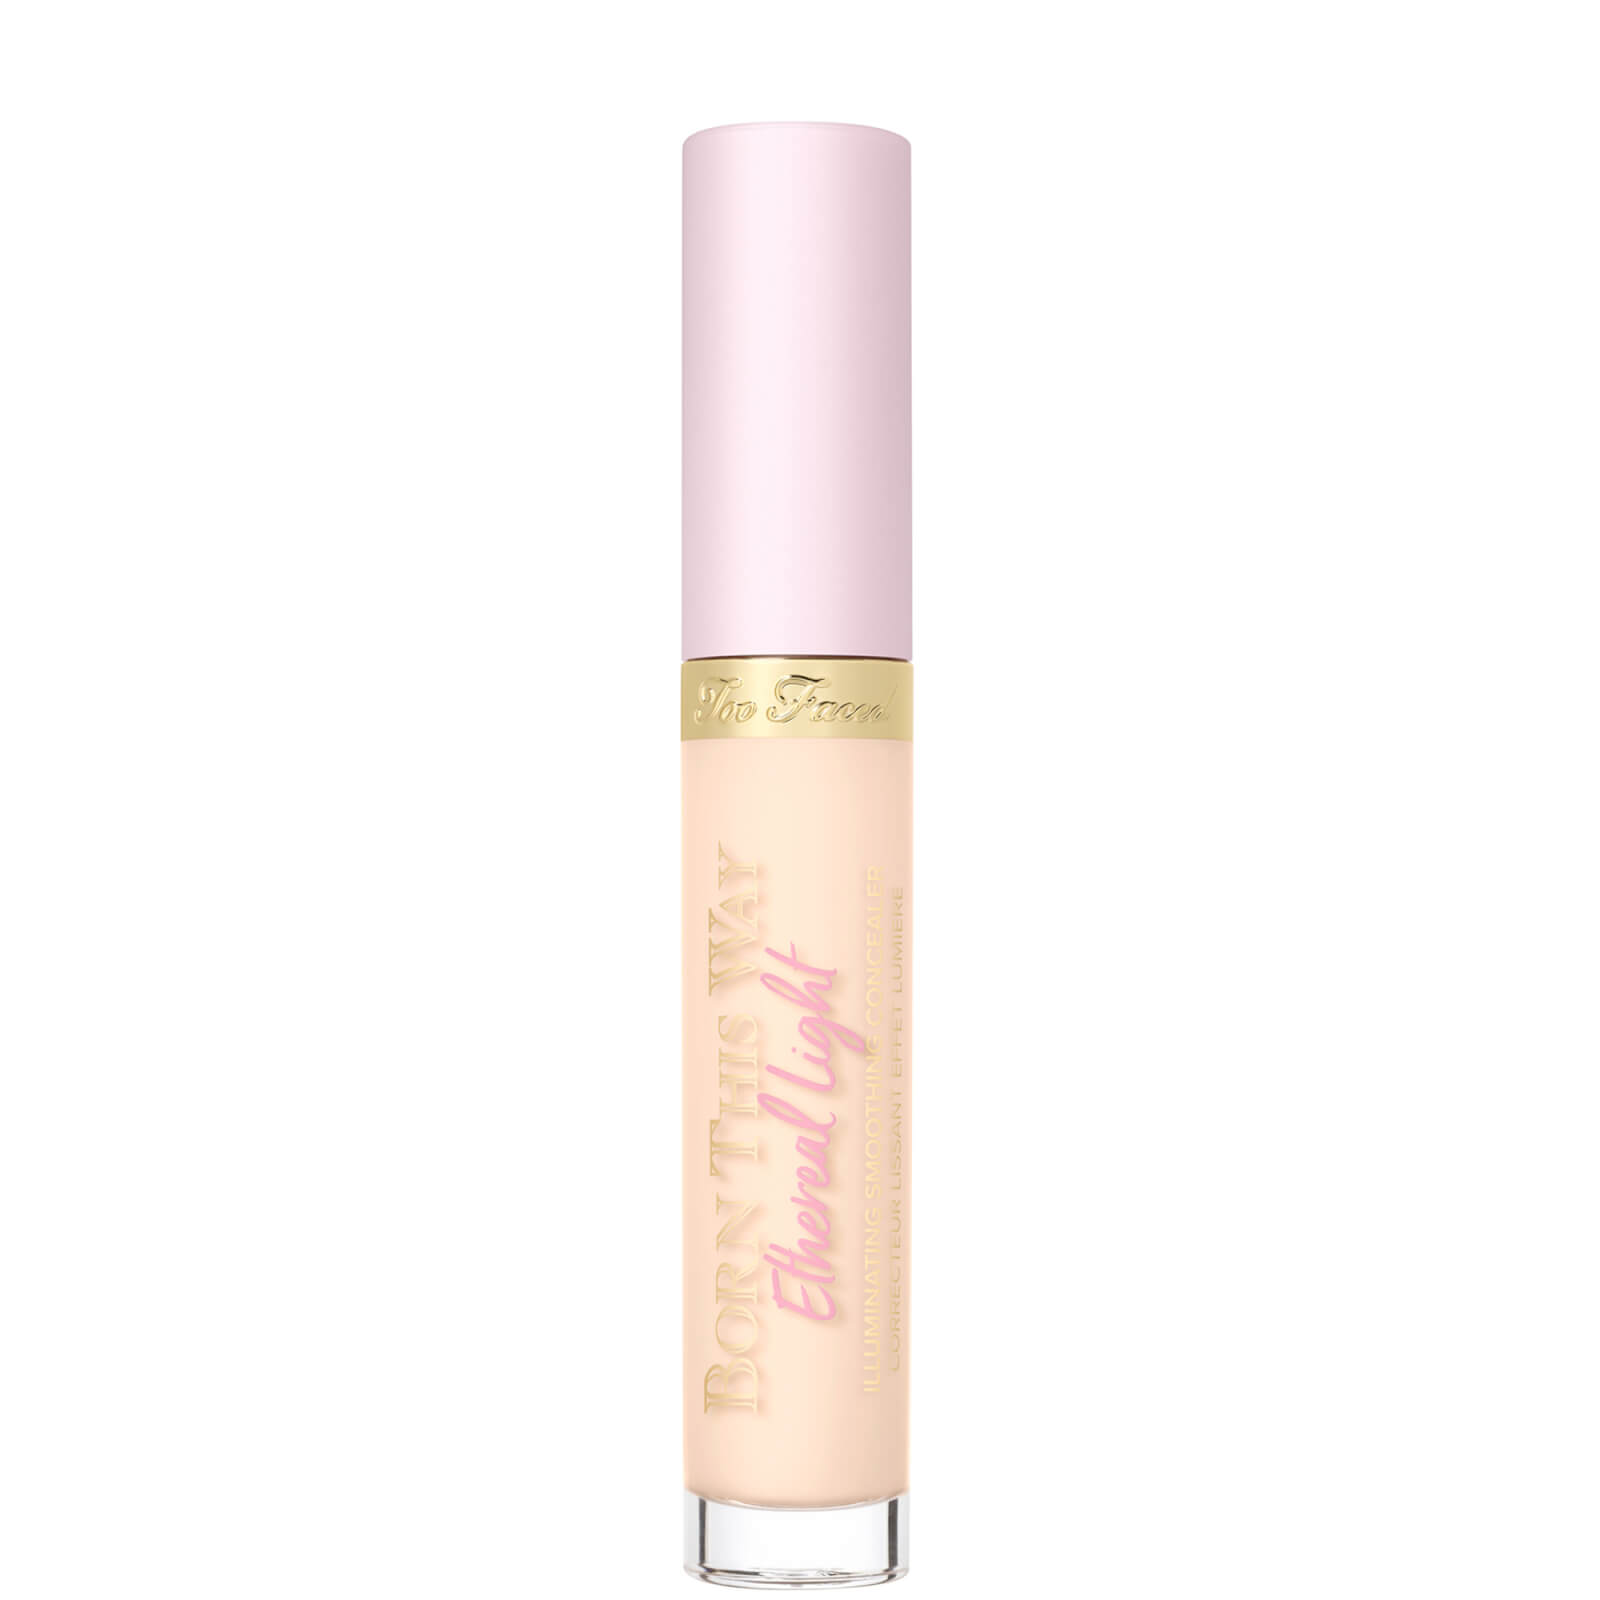 Too Faced Born This Way Ethereal Light Illuminating Smoothing Concealer 15ml (Various Shades) - Milk